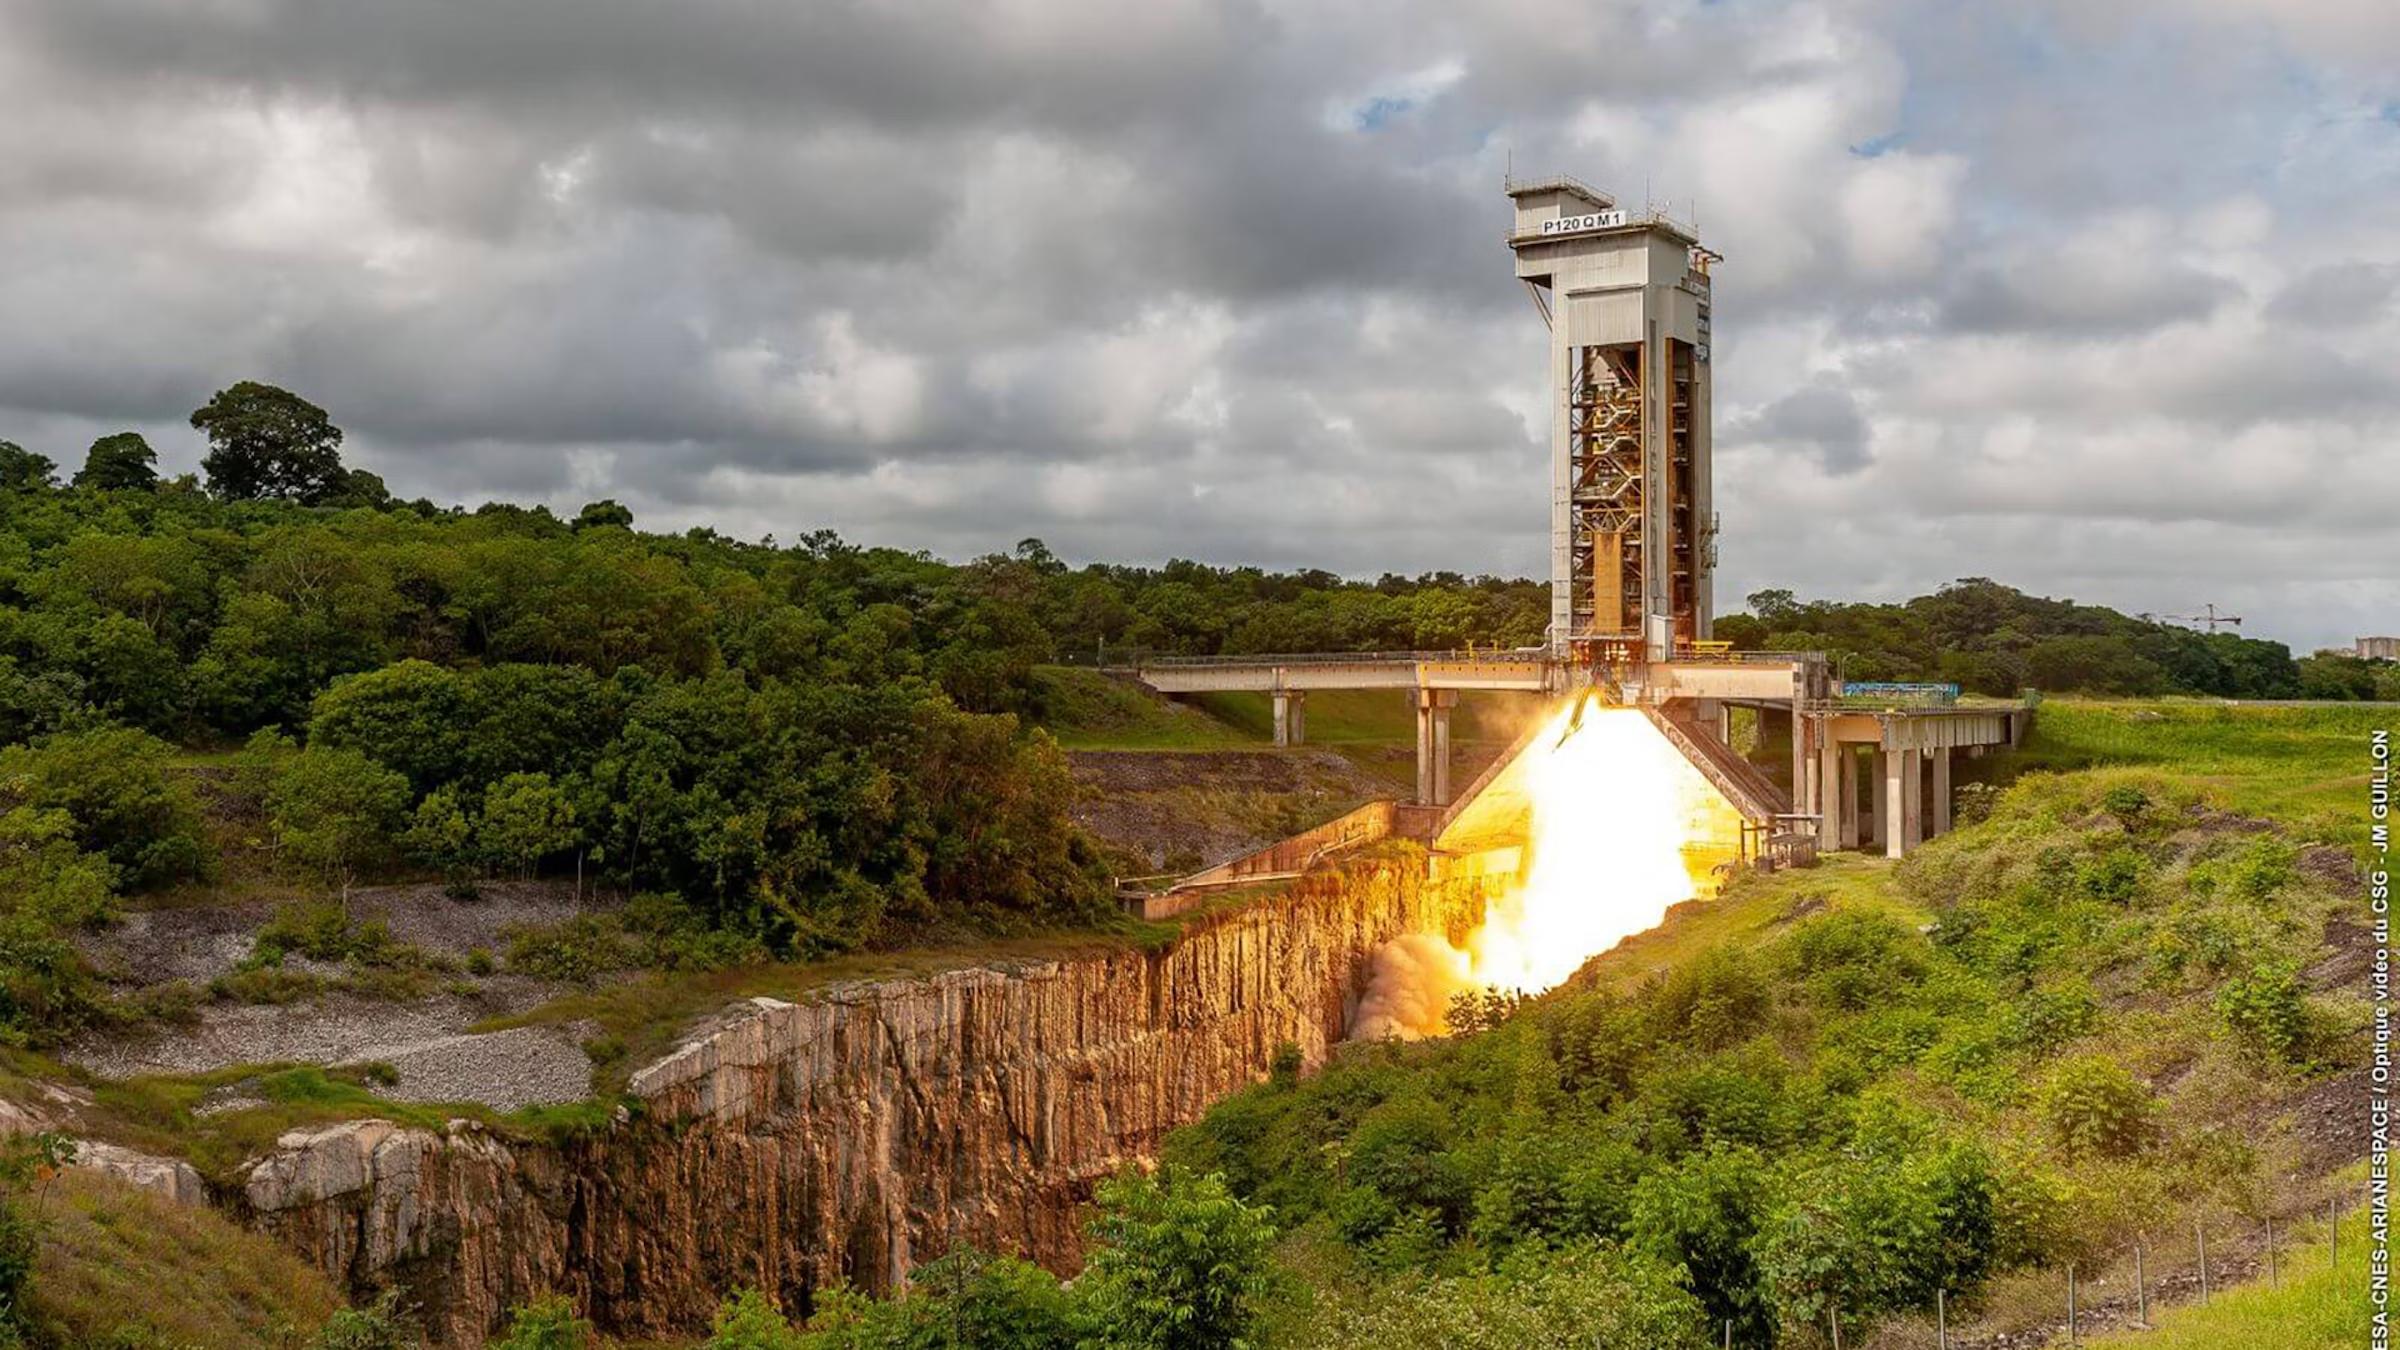 Firing test of the Ariane 6's P120 solid rocket booster at Kourou in French Guiana, South America